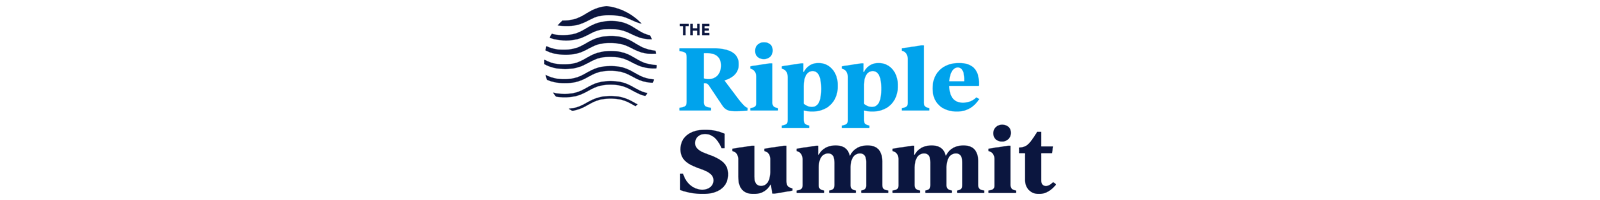 The Ripple Summit logo banner 1600x200 png